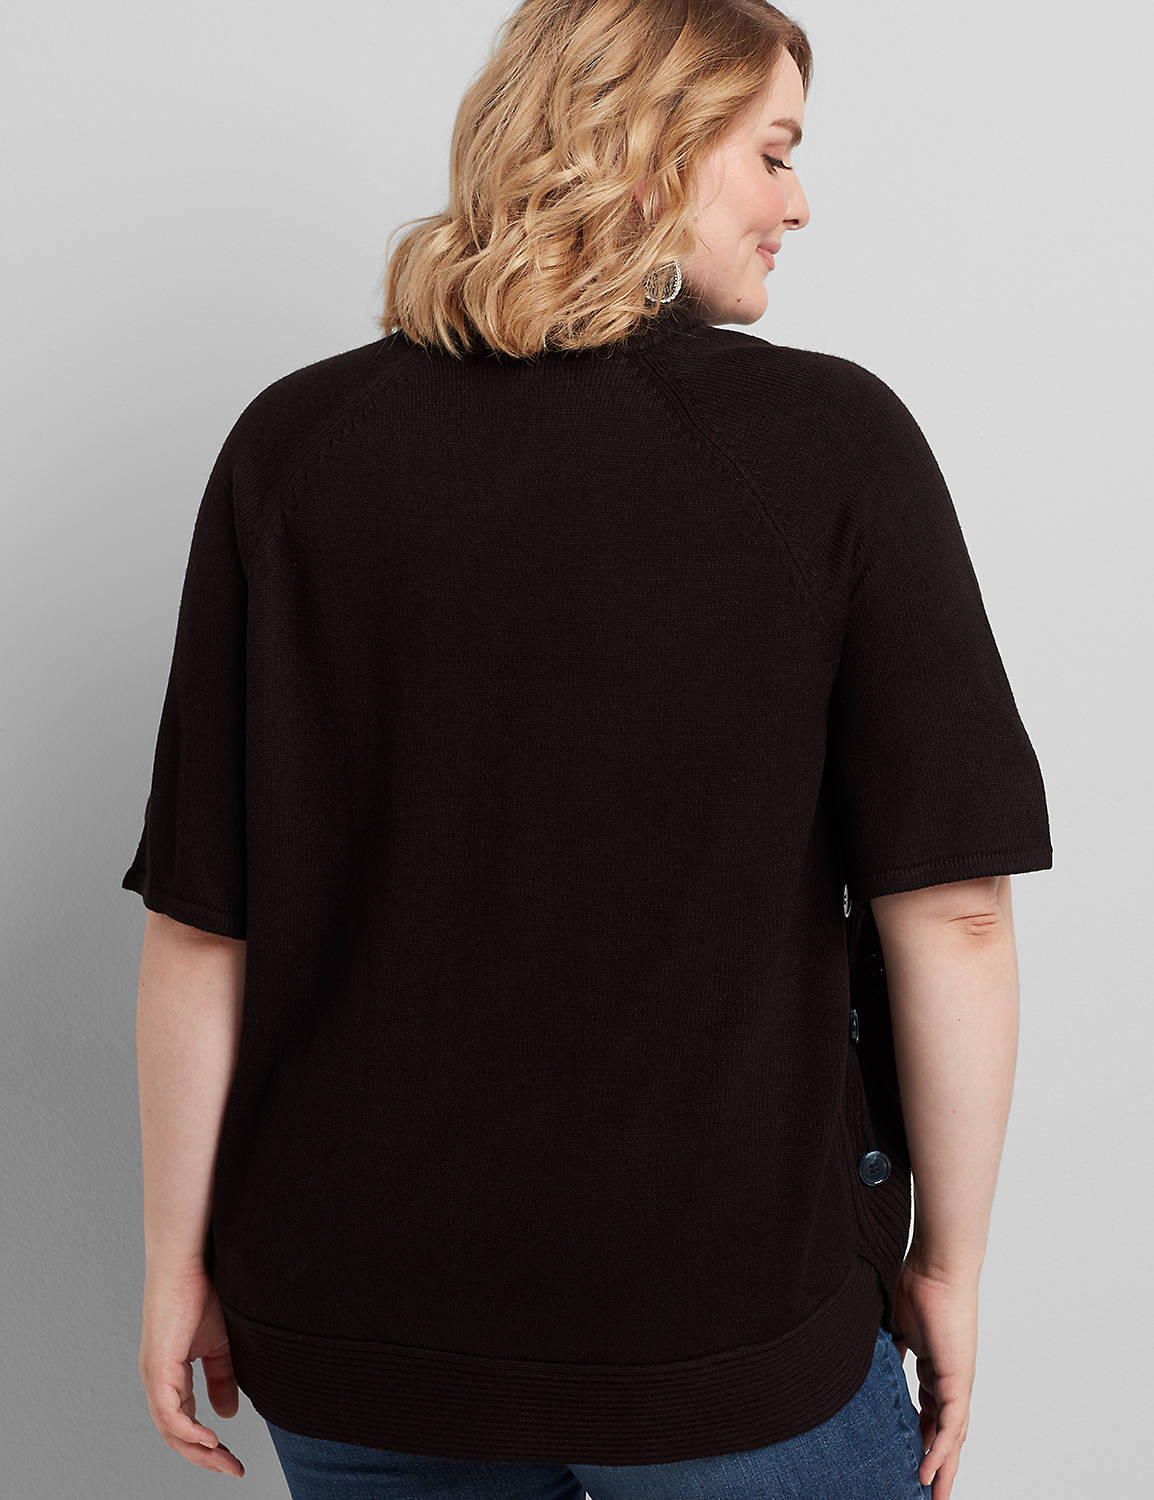 SHORT SLEEVE MOCK NECK BUTTON SIDE PONCHO 1113568:Pitch Black LB 1000322:22/24 Product Image 2